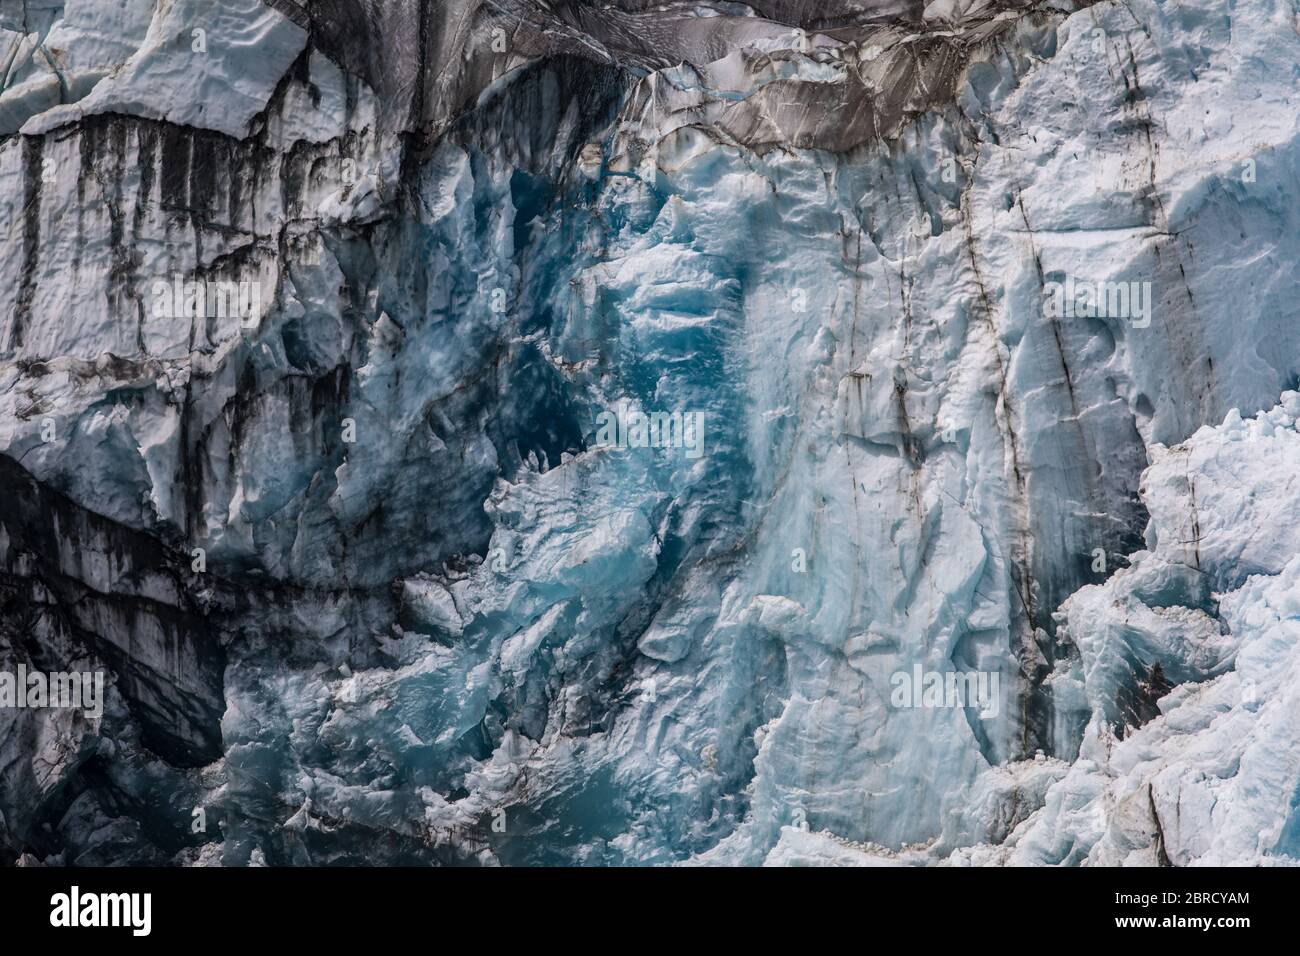 Sawyer Glacier, Tracy Arm Fjord, Southeast Alaska, is an active tidewater glacier appreciated by tourists on small ship cruises and boat tours. Stock Photo